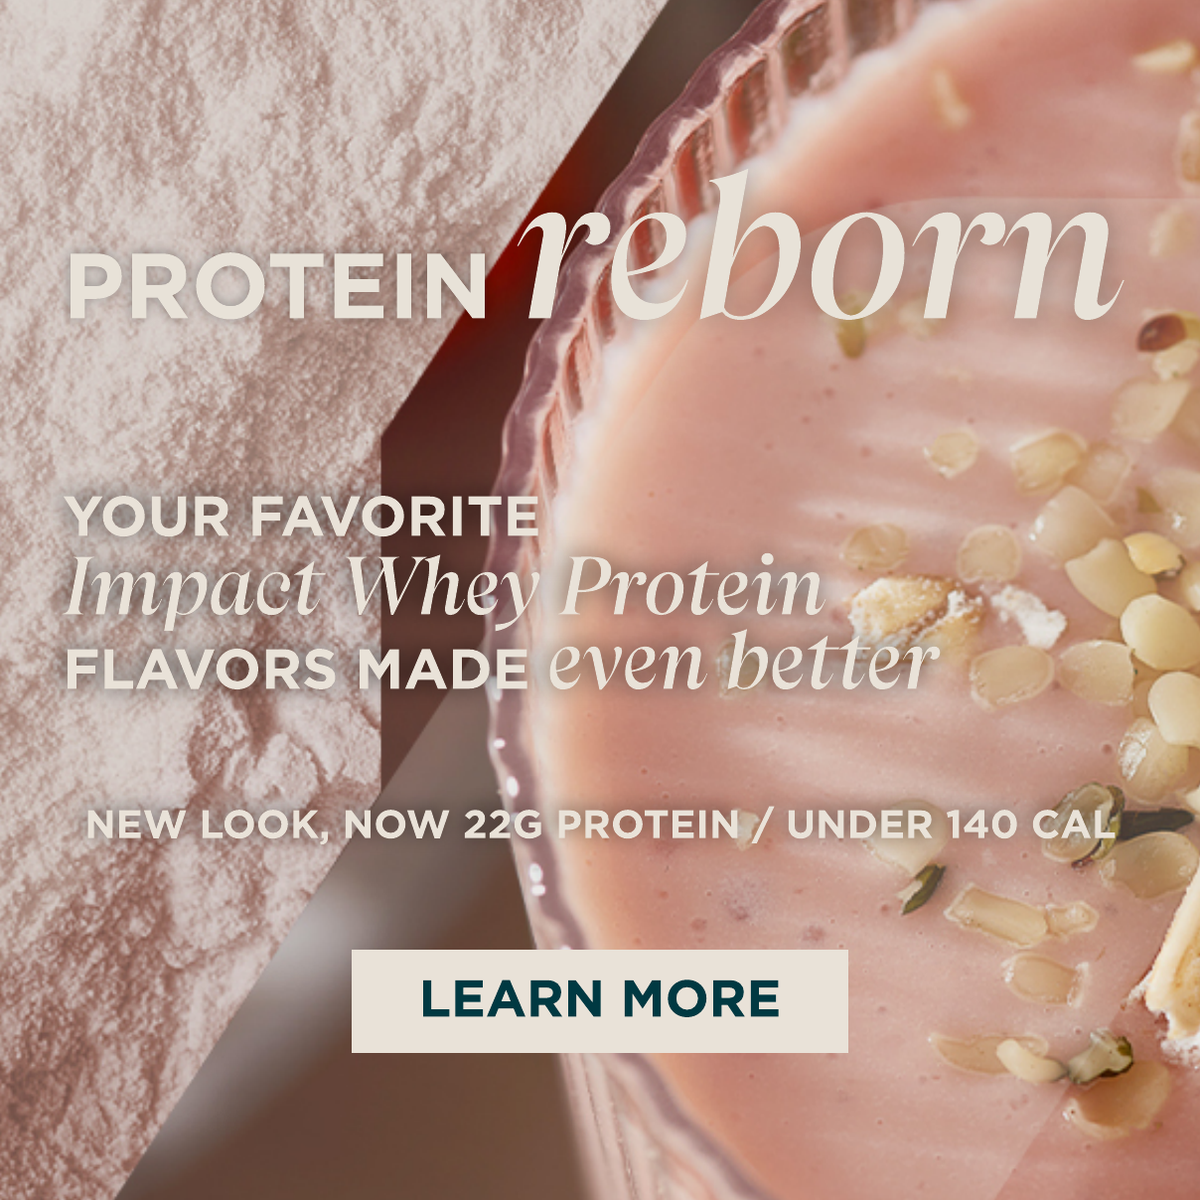 https://us.myprotein.com/thezone/supplements/new-improved-whey-protein-flavors/